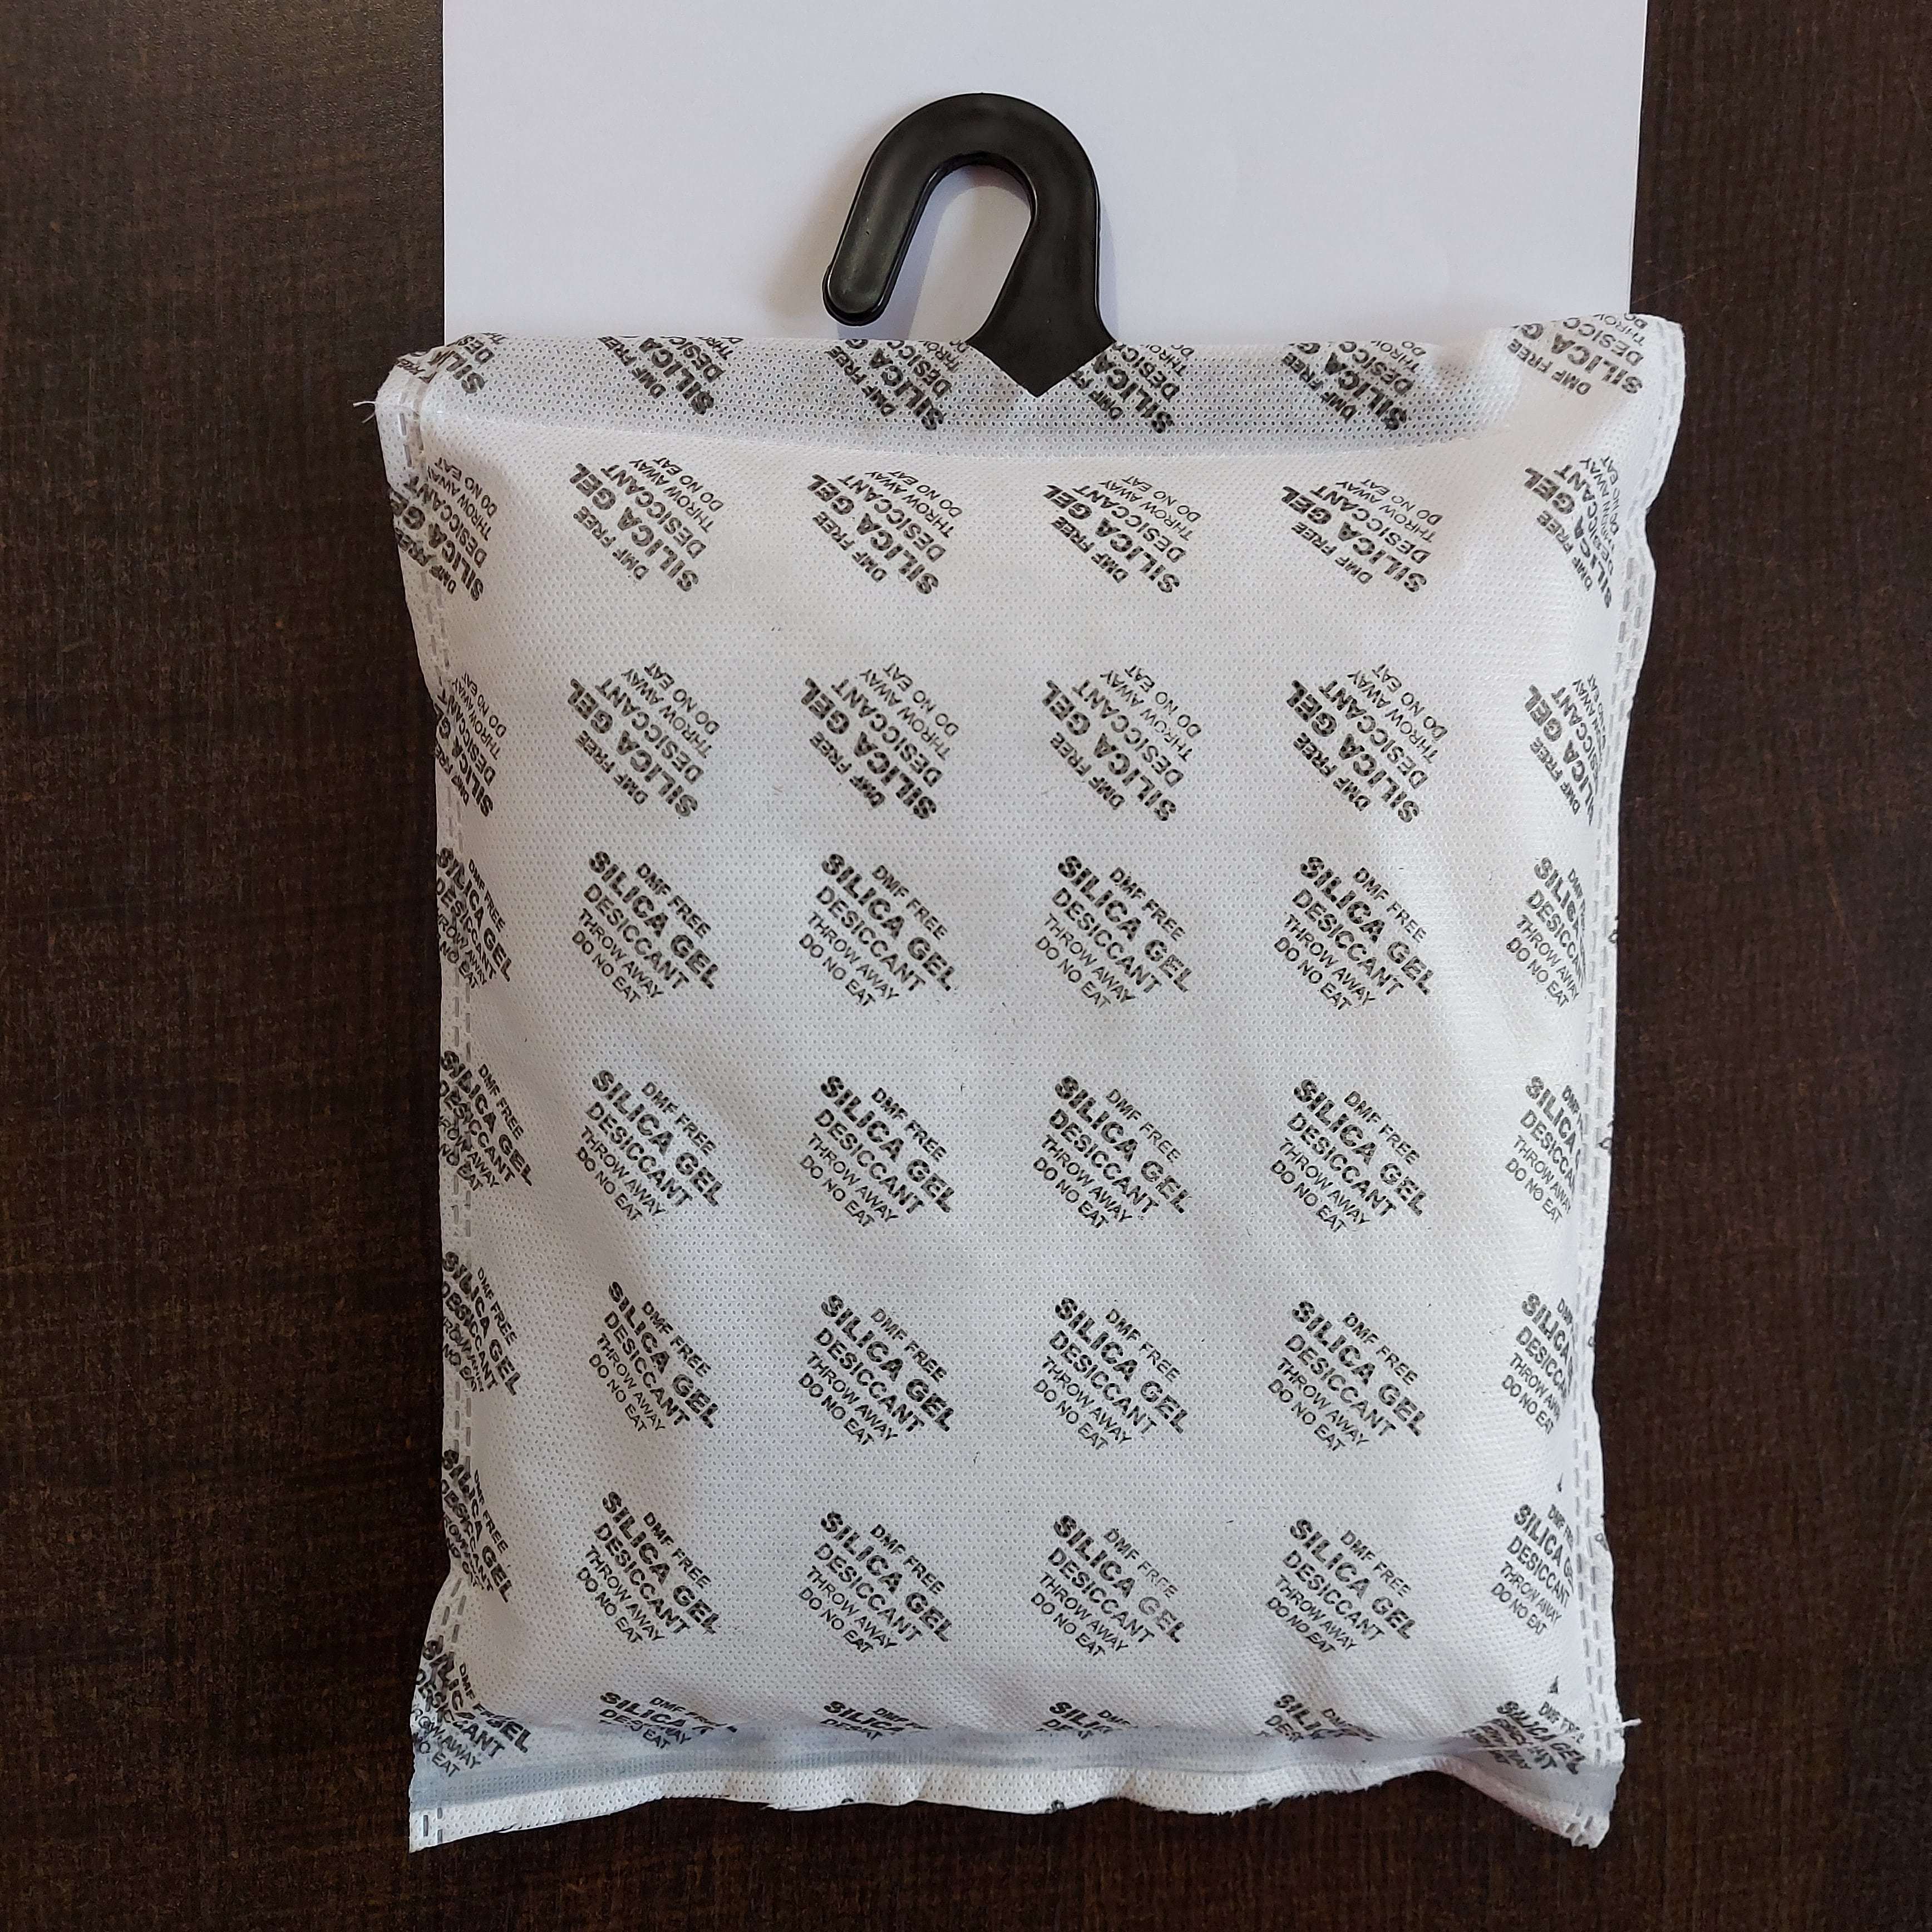 1 Kg Silica Gel Pouch Hook Manufacturer,Supplier,Exporter,Trading  Company,India